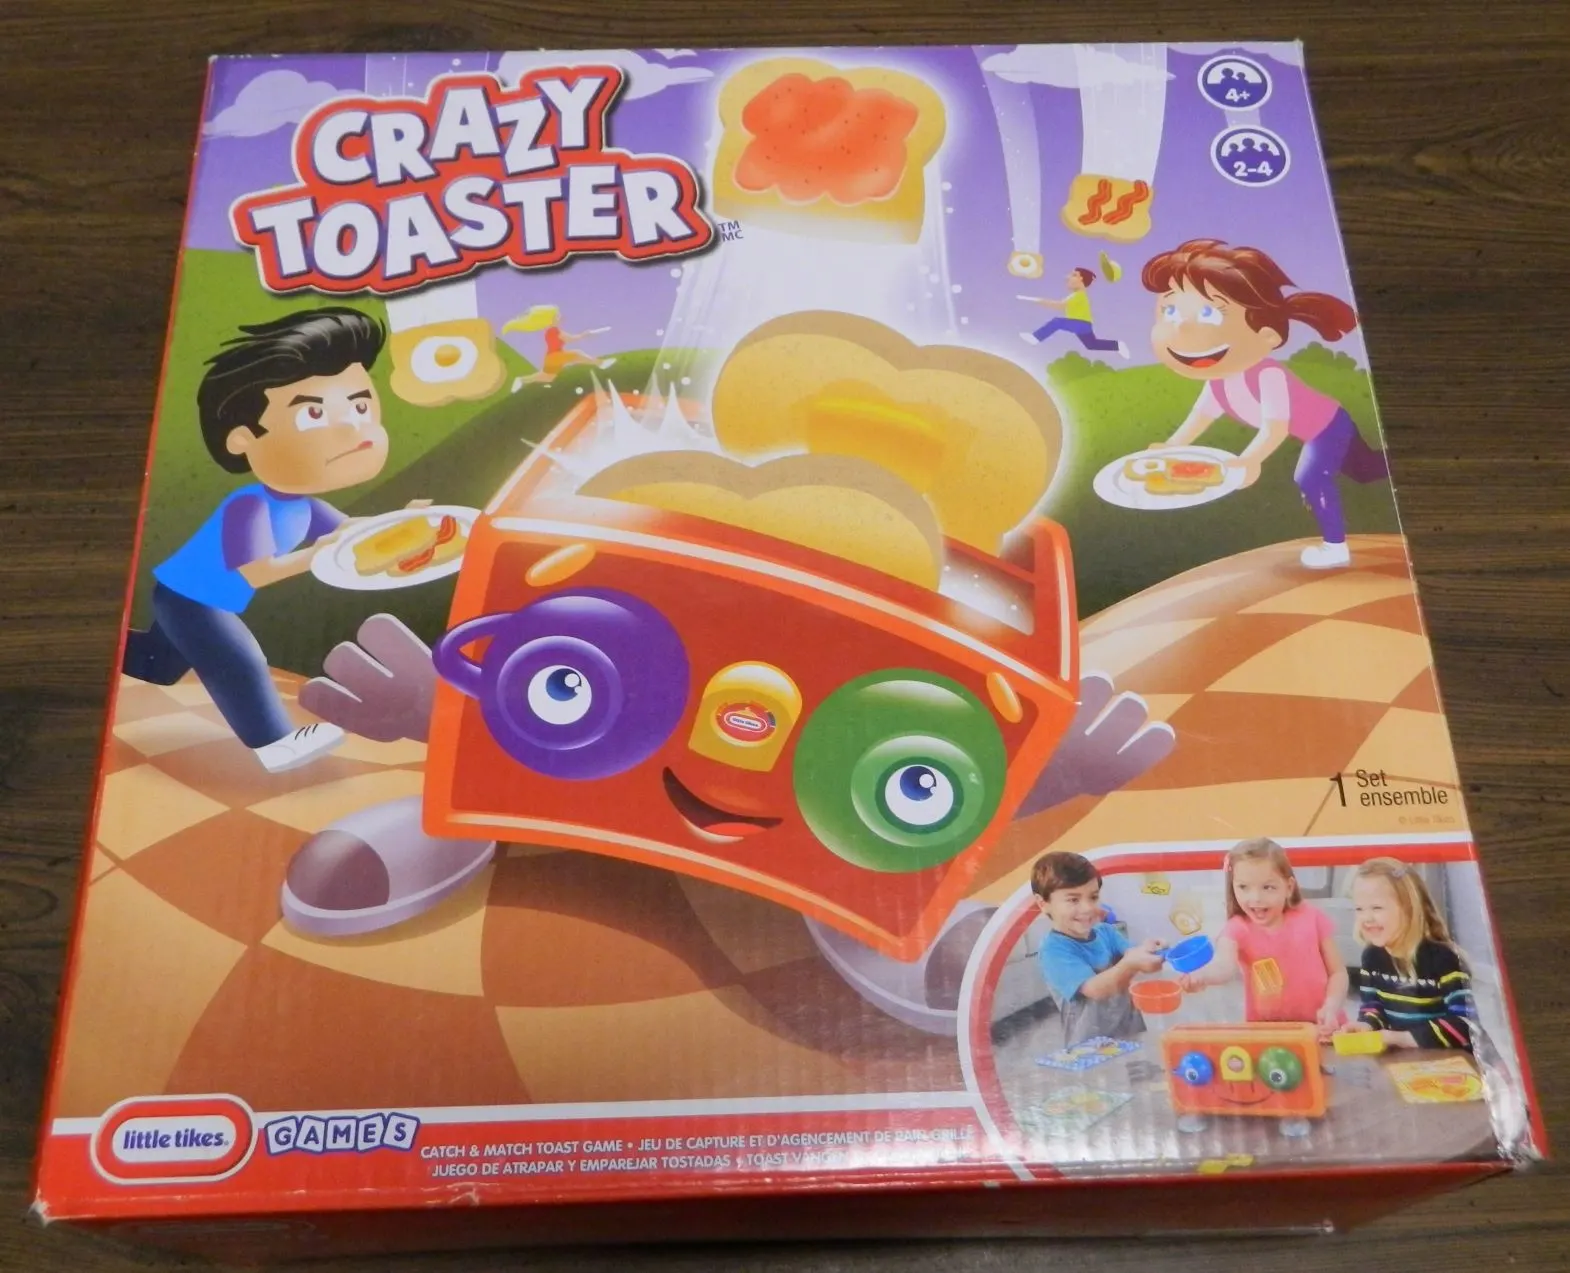 Box for Crazy Toaster